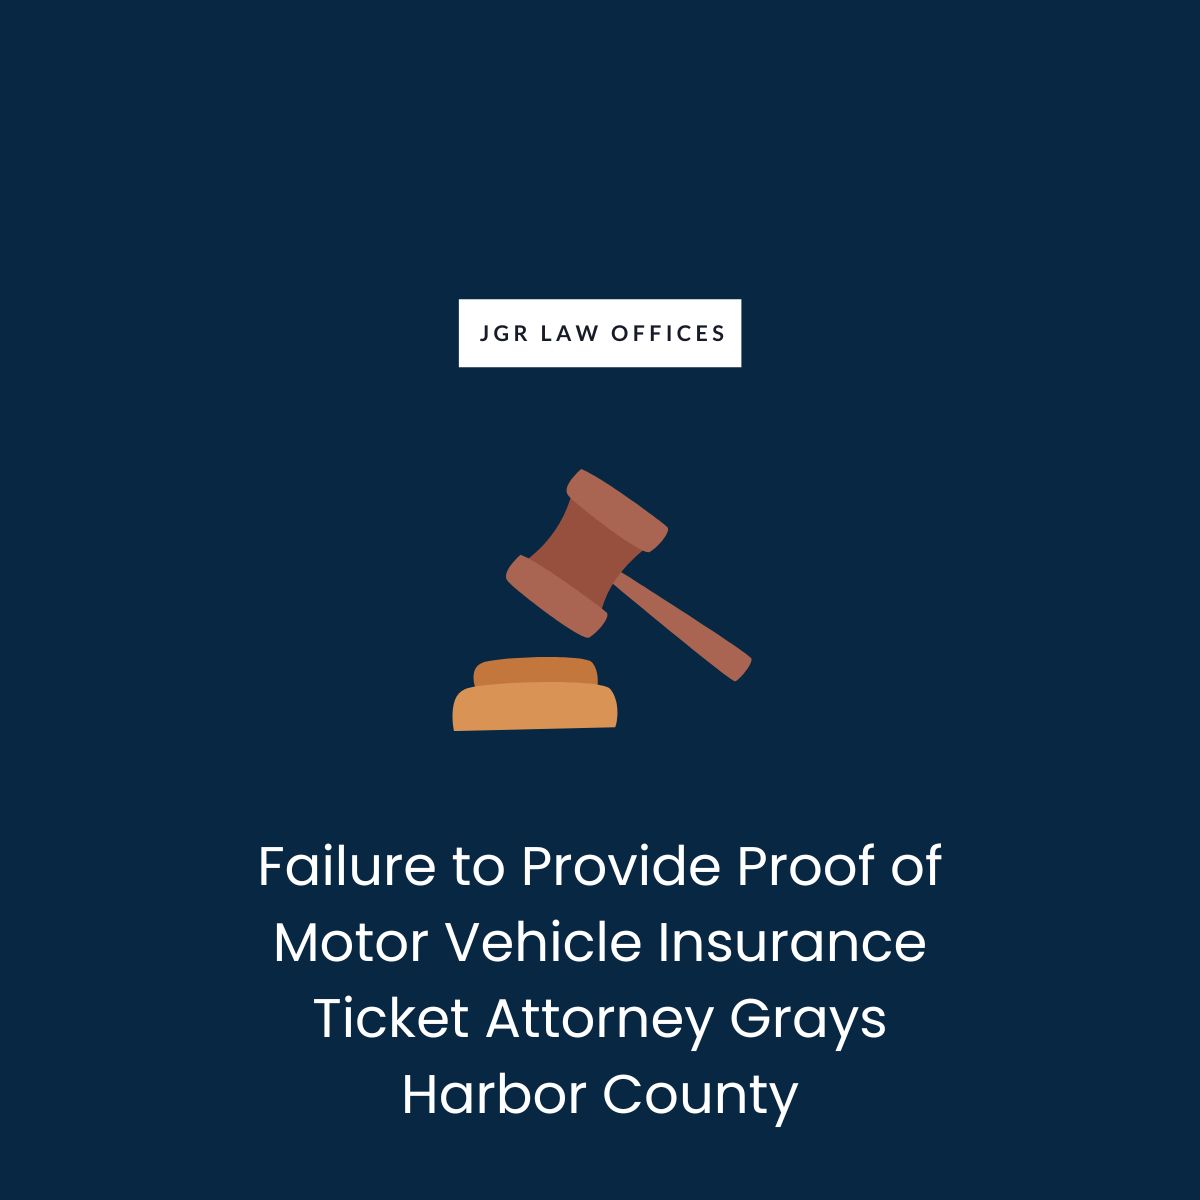 Failure to Provide Proof of Motor Vehicle Insurance Ticket Attorney Grays Harbor County